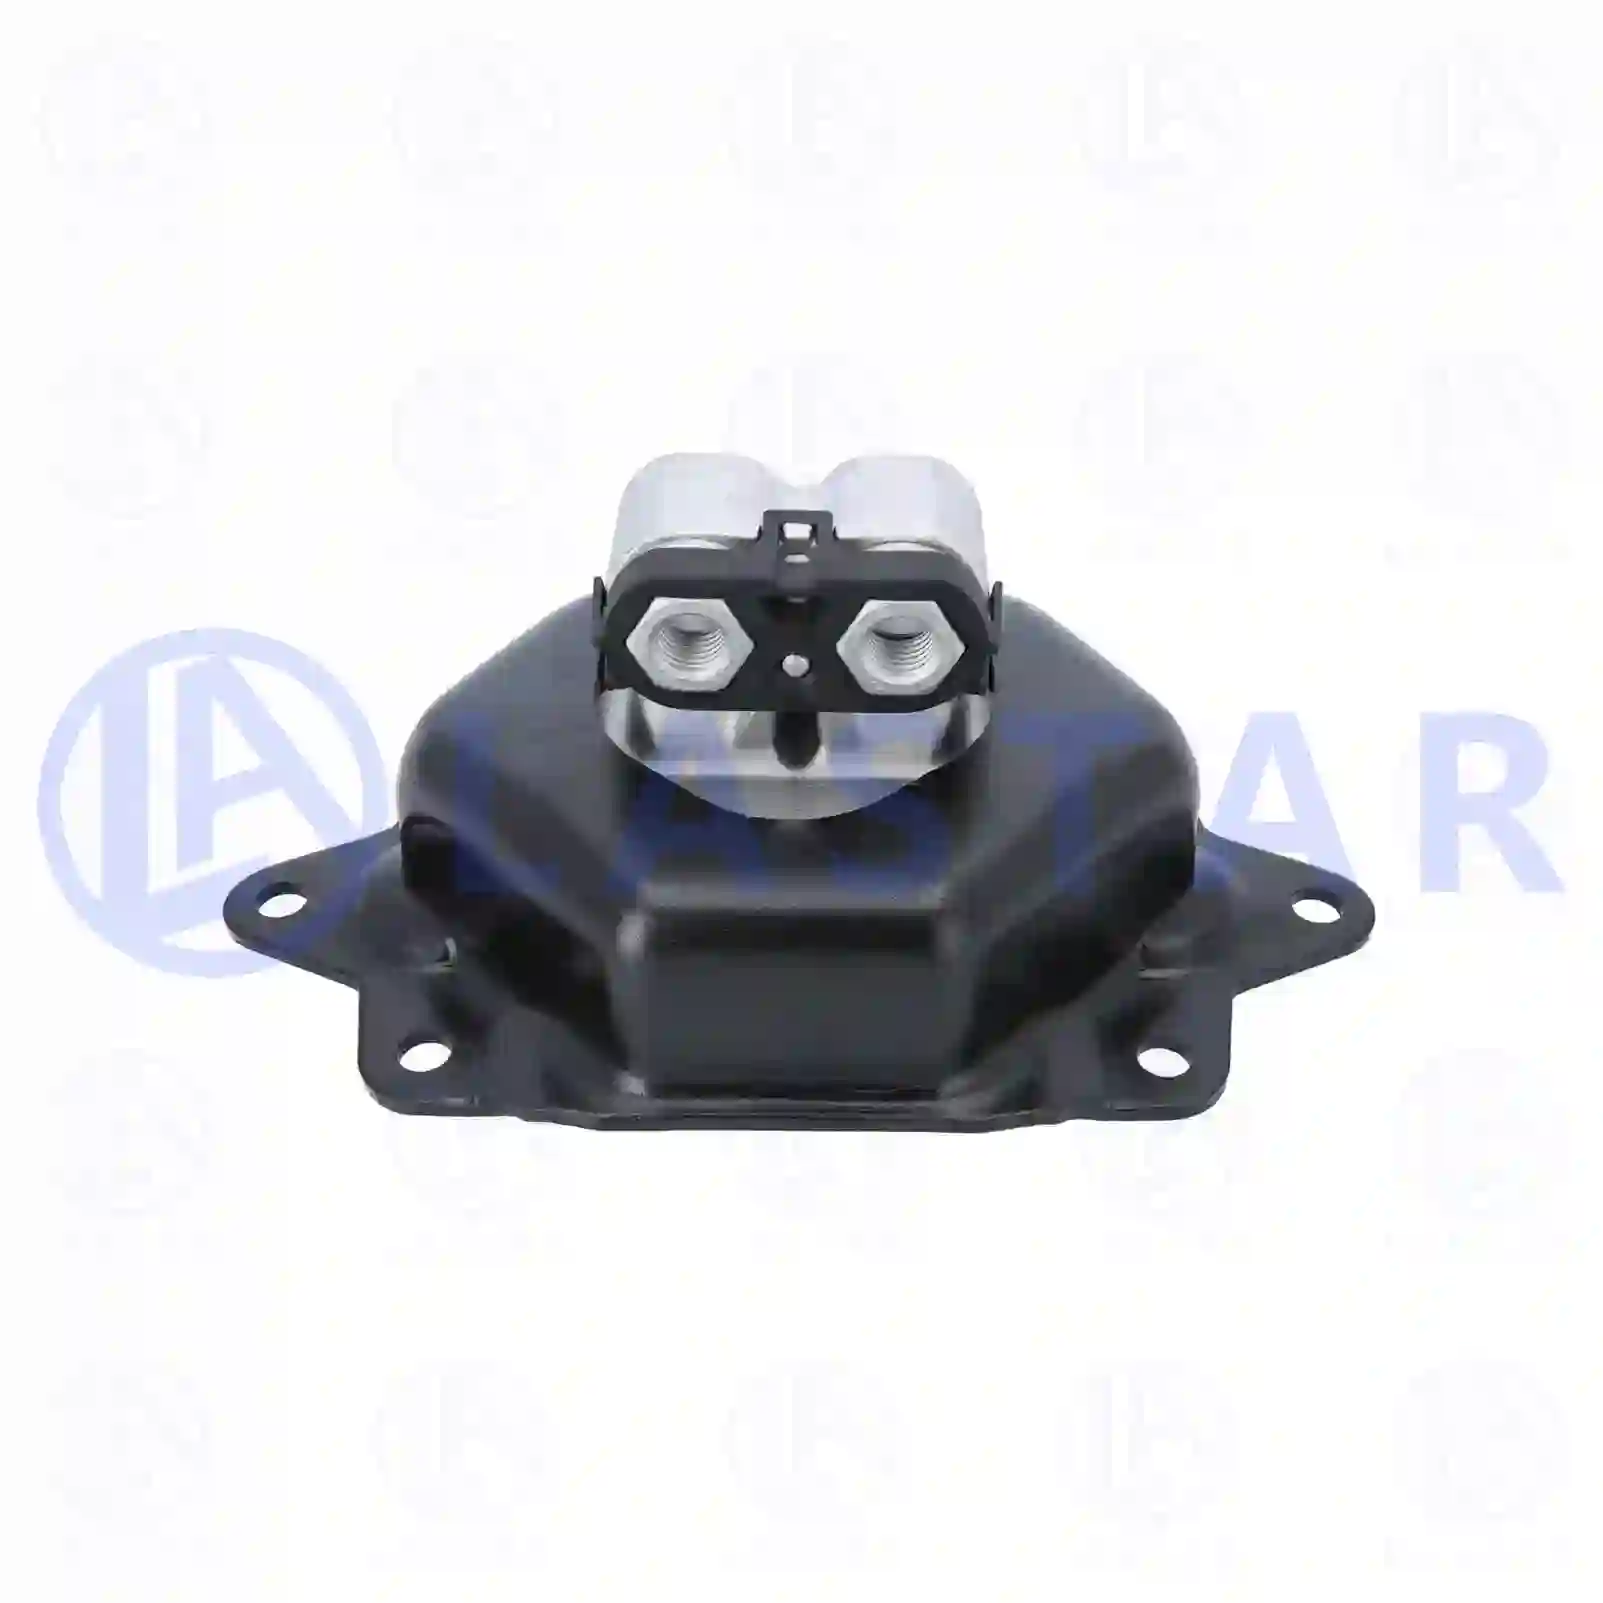 Engine mounting, 77703535, 21563456 ||  77703535 Lastar Spare Part | Truck Spare Parts, Auotomotive Spare Parts Engine mounting, 77703535, 21563456 ||  77703535 Lastar Spare Part | Truck Spare Parts, Auotomotive Spare Parts